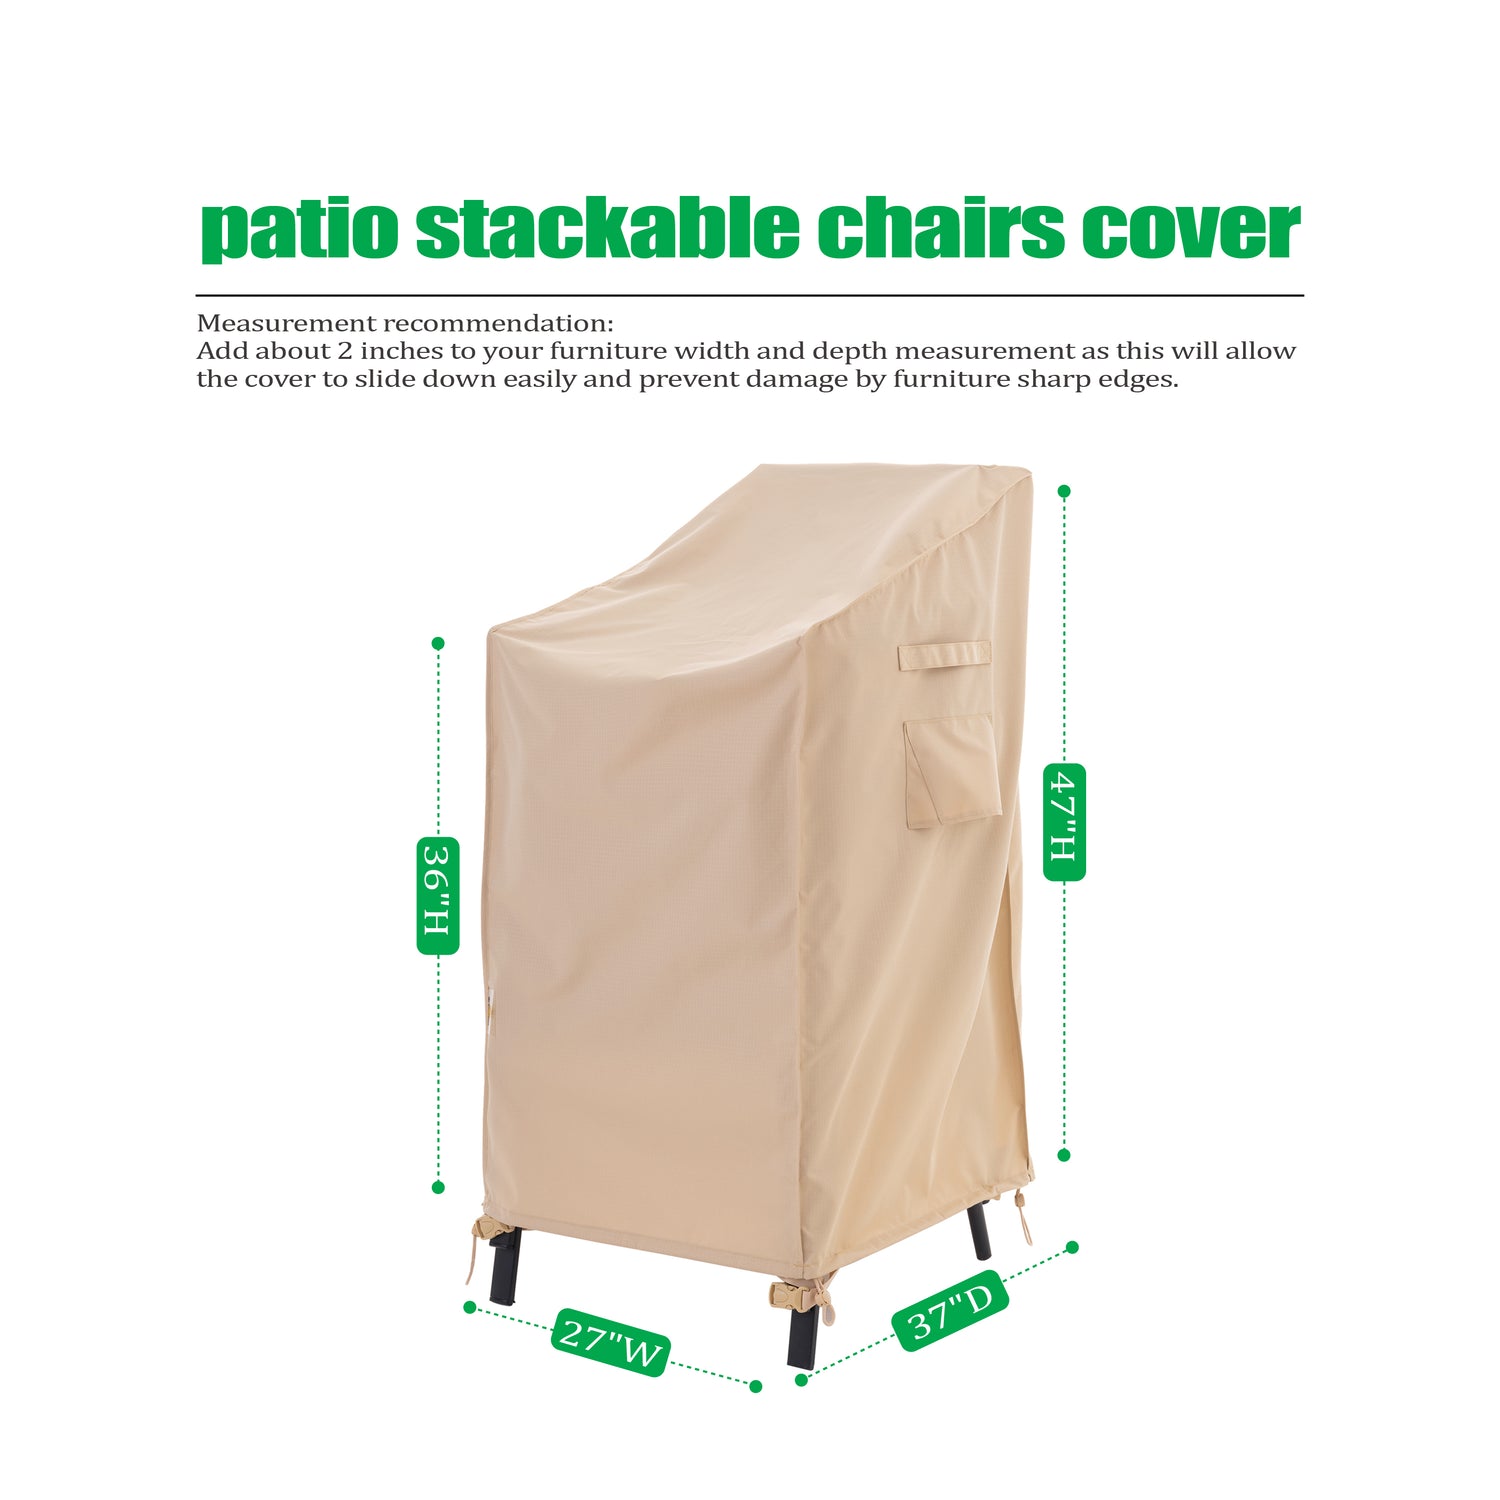 2024 Edition Patio Chair Cover - Beige